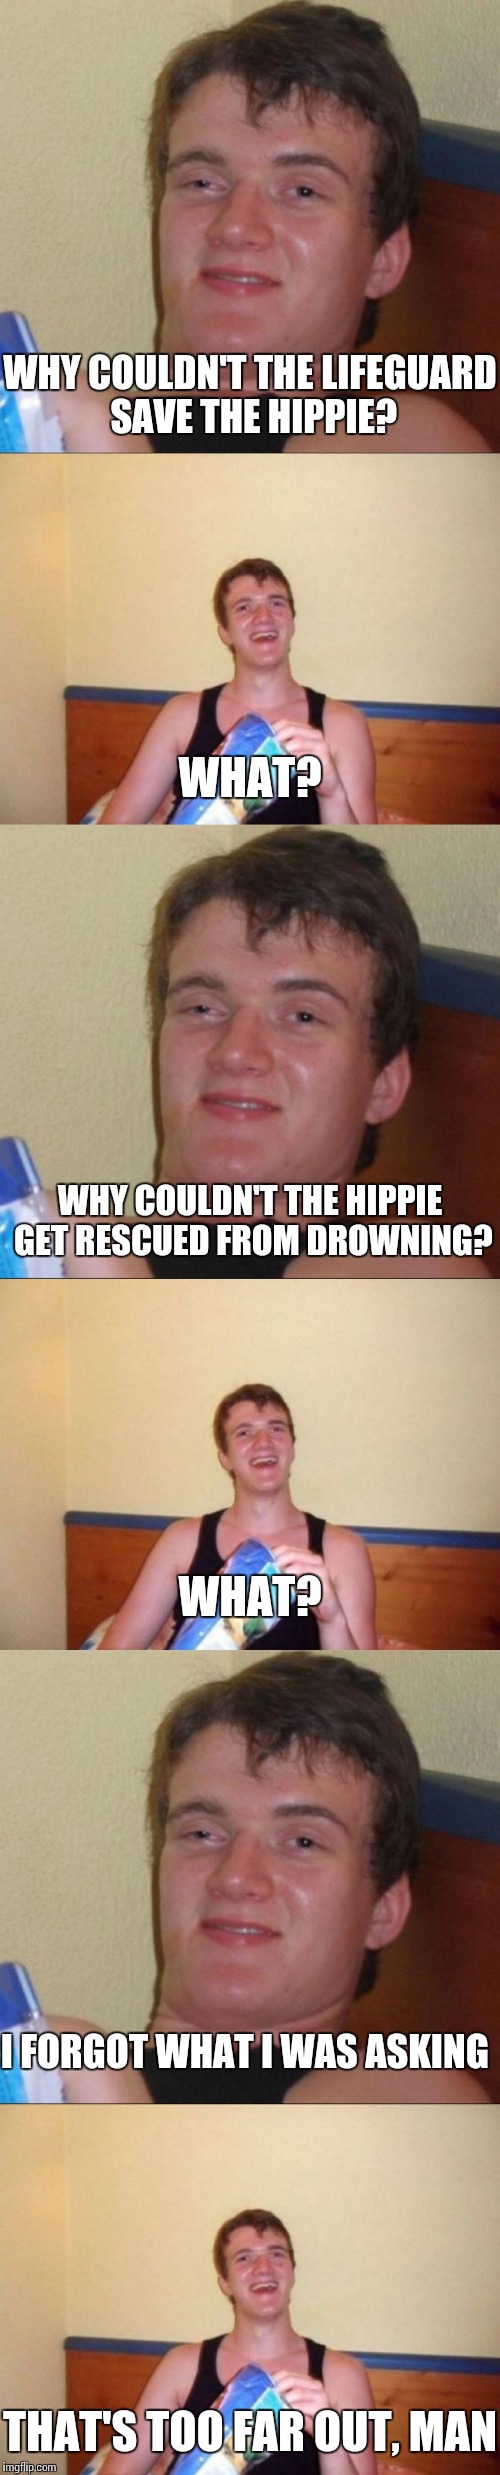 WHY COULDN'T THE LIFEGUARD SAVE THE HIPPIE? WHAT? WHY COULDN'T THE HIPPIE GET RESCUED FROM DROWNING? WHAT? I FORGOT WHAT I WAS ASKING; THAT'S TOO FAR OUT, MAN | image tagged in 10 guy | made w/ Imgflip meme maker